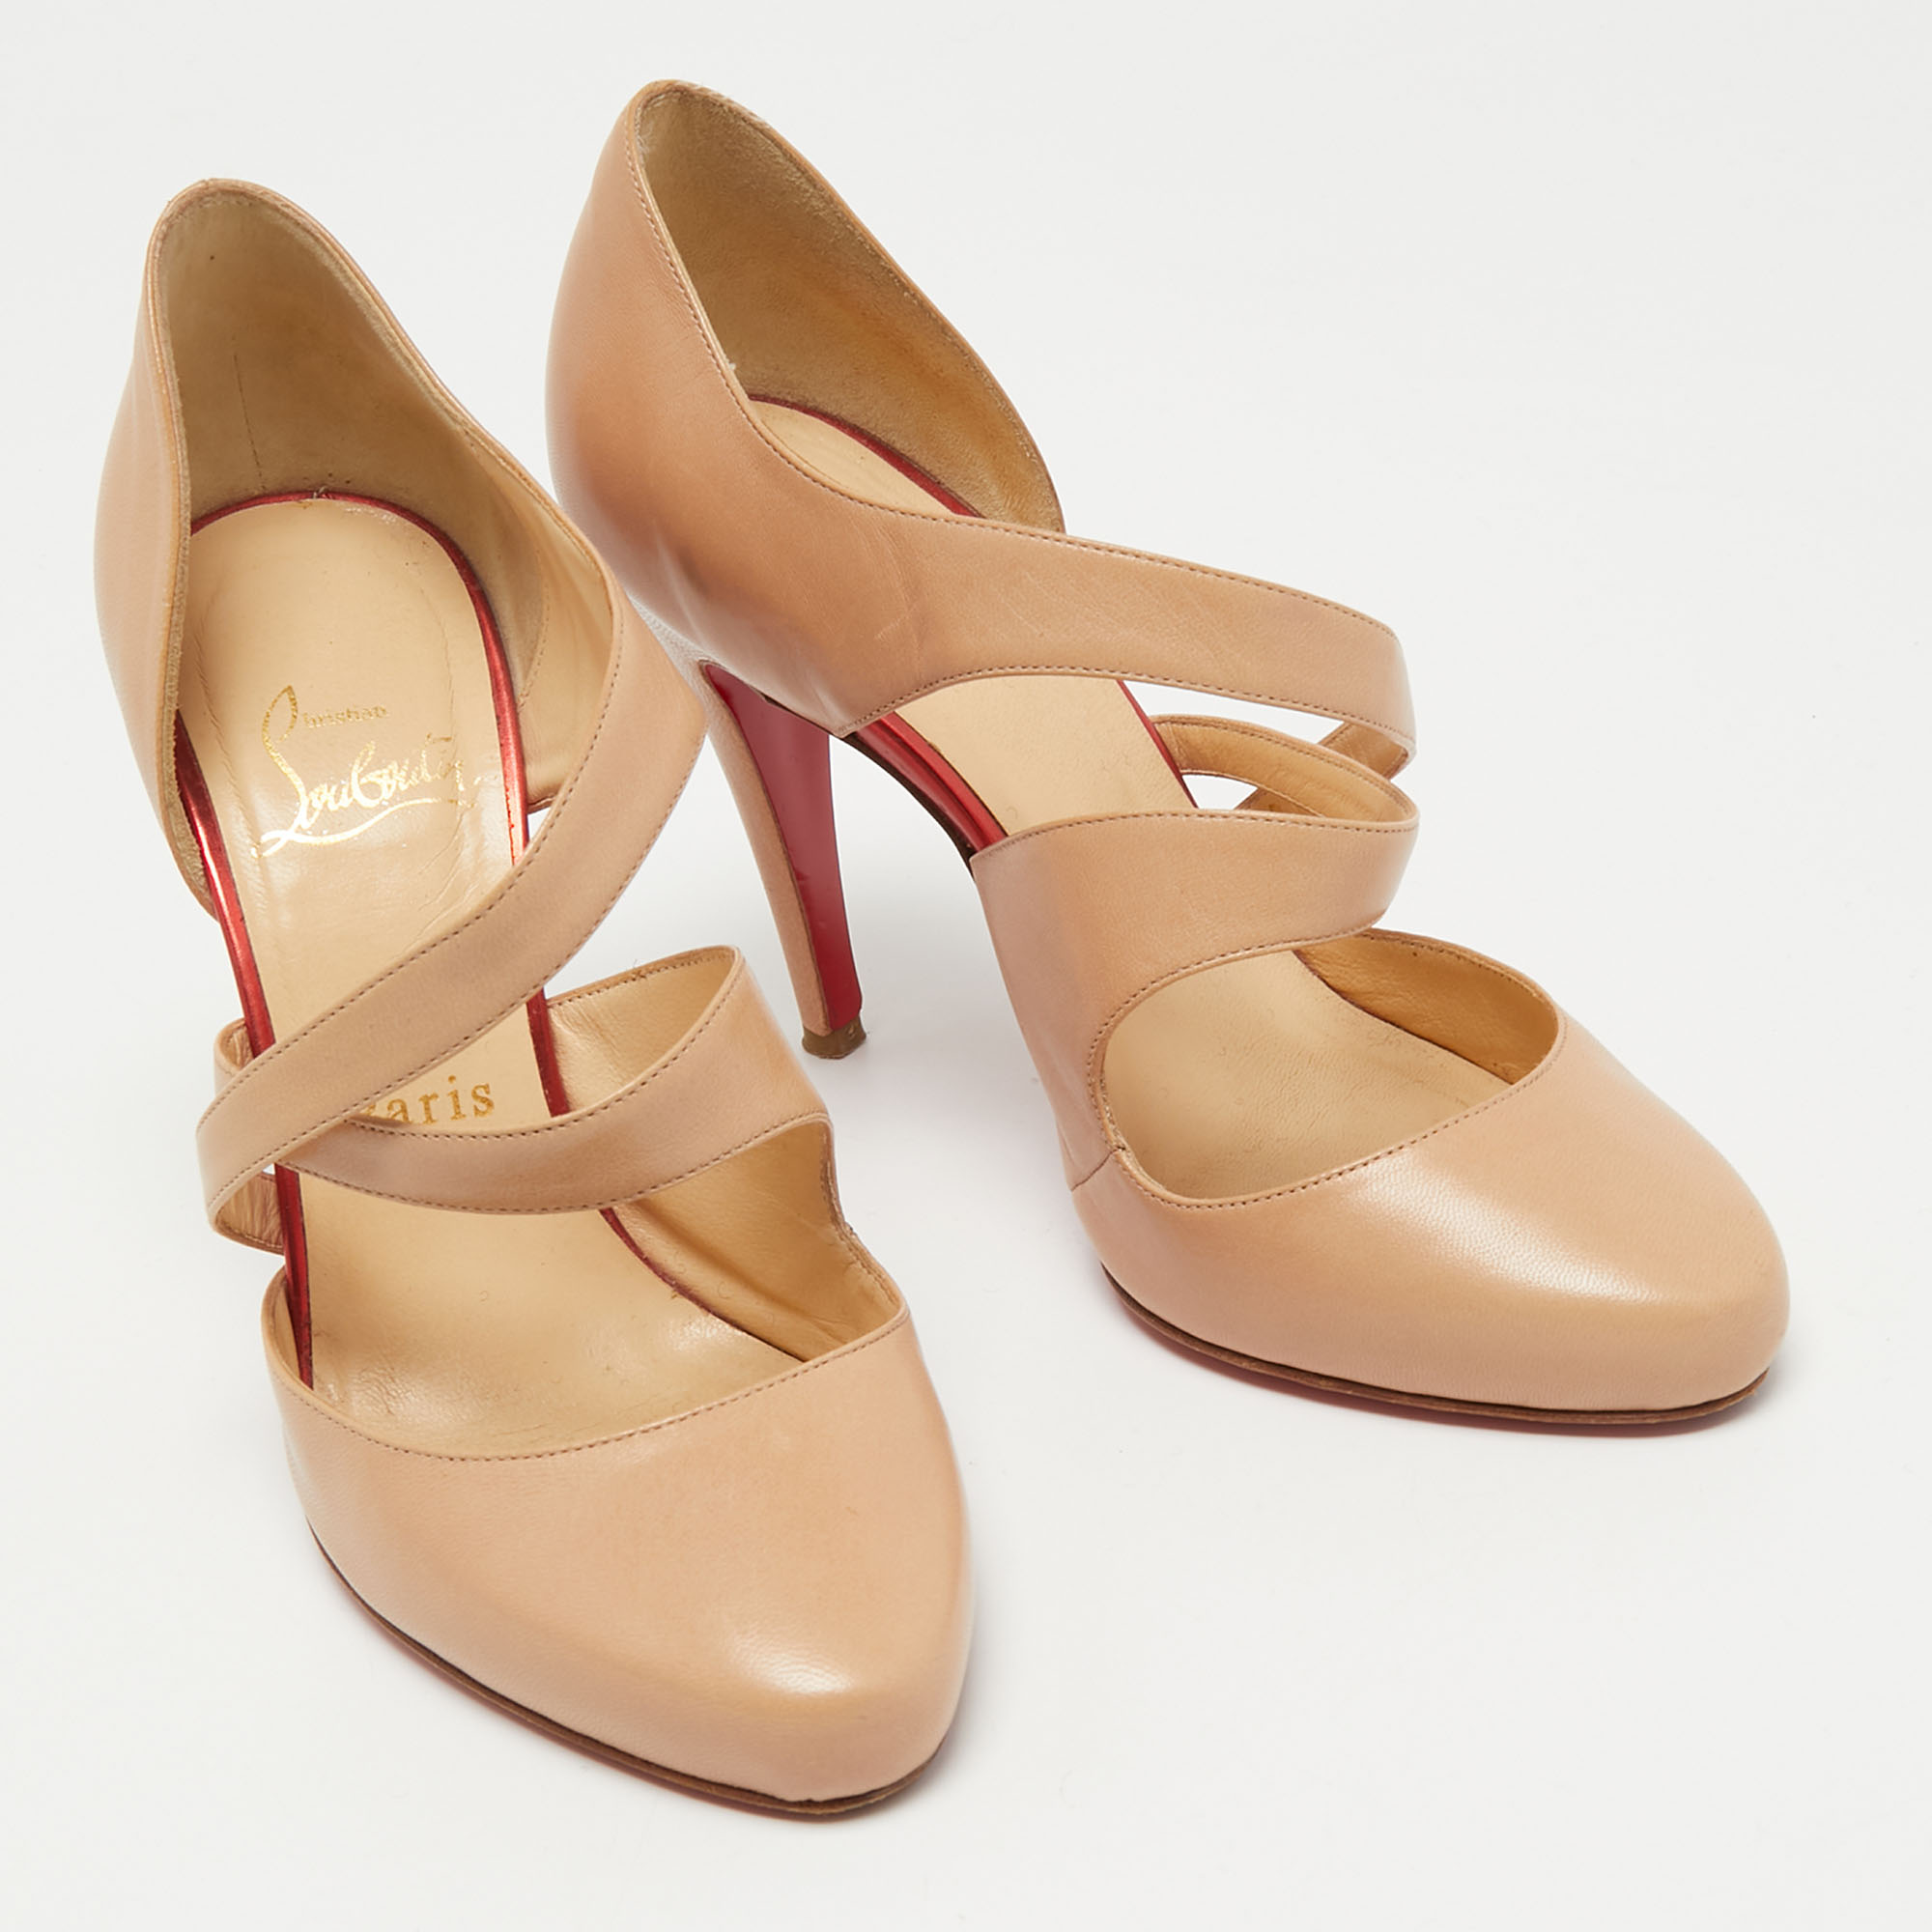 Christian Louboutin Beige Leather Citoyenne Pumps Size 36.5